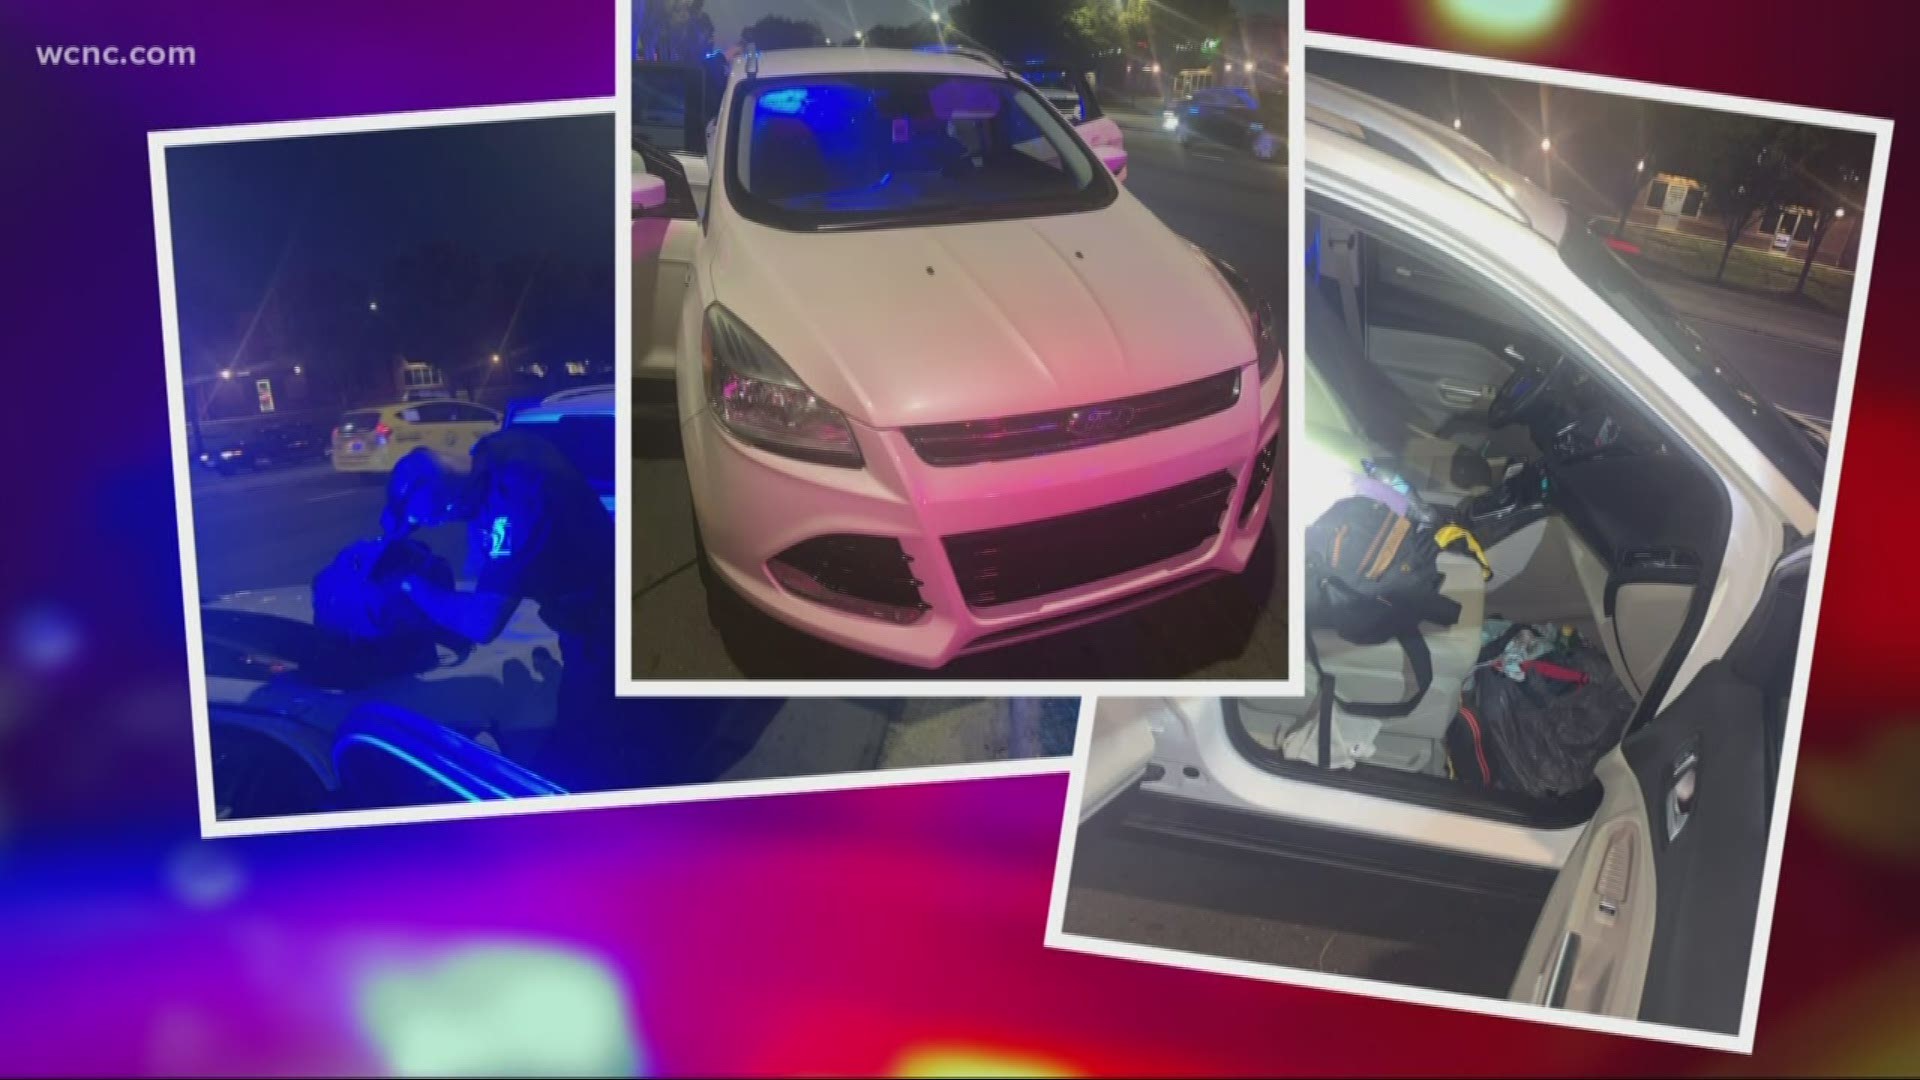 CMPD initiated a dramatic takedown of the accused shooter's car Friday night on Wilkinson Boulevard. Officers found a gun and rideshare passenger inside.